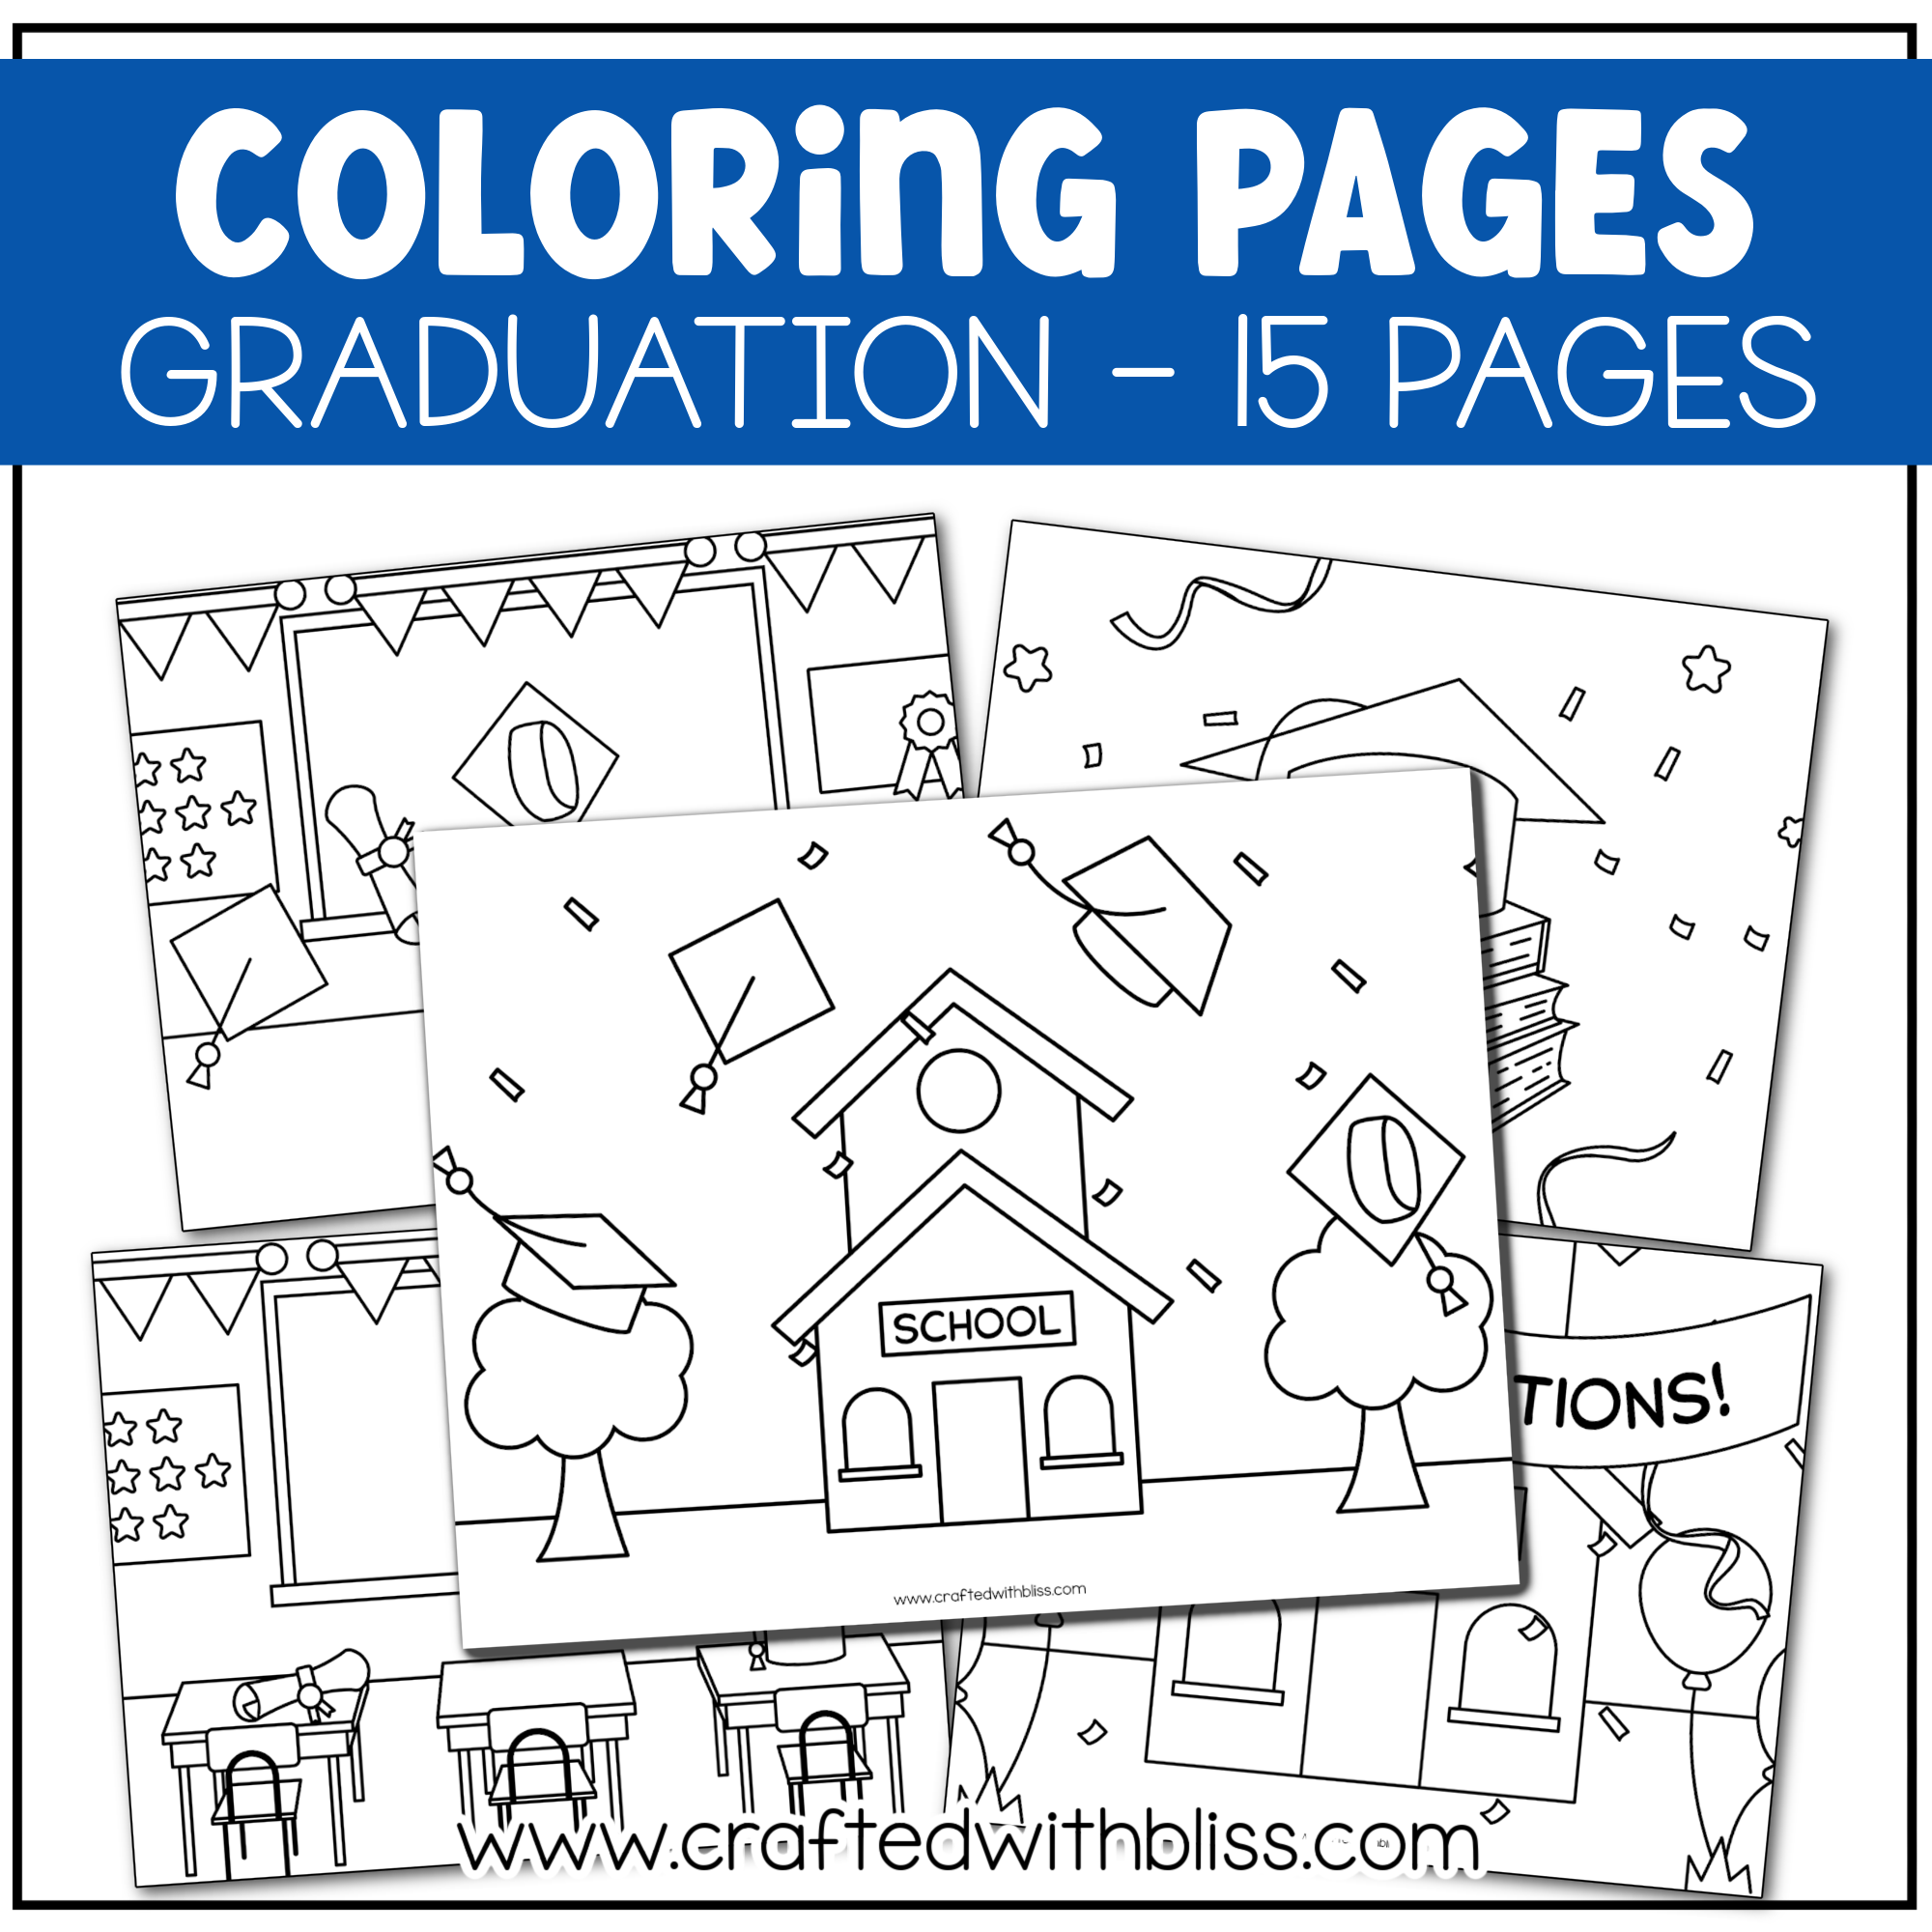 FREE Graduation Coloring Pages for Kids